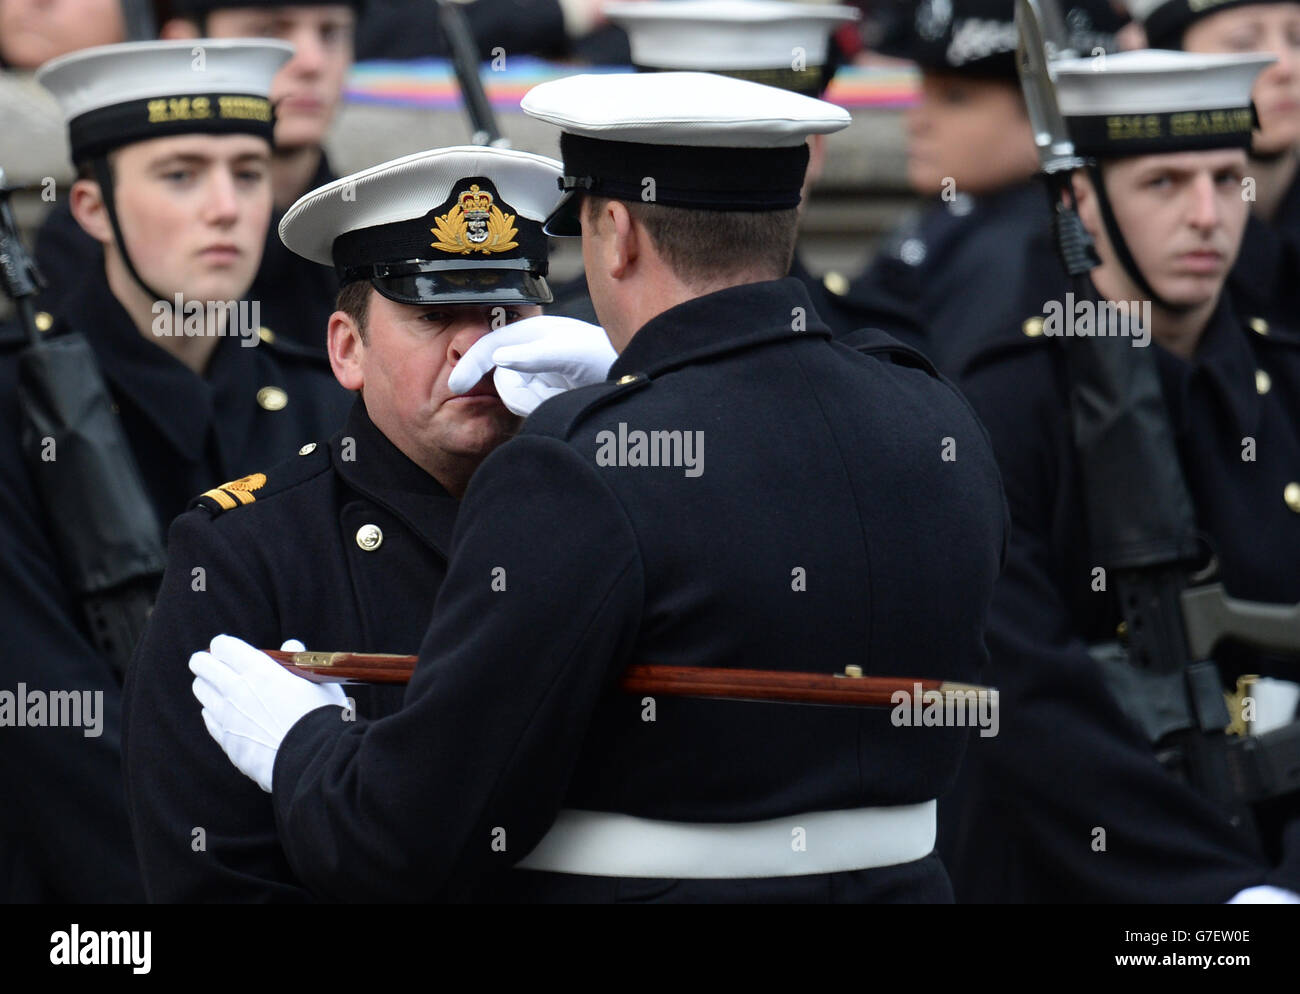 An officer has his nose scratched at the Cenotaph memorial in Whitehall, central London, during the annual Remembrance Sunday service held in tribute for members of the armed forces who have died in major conflicts. Stock Photo